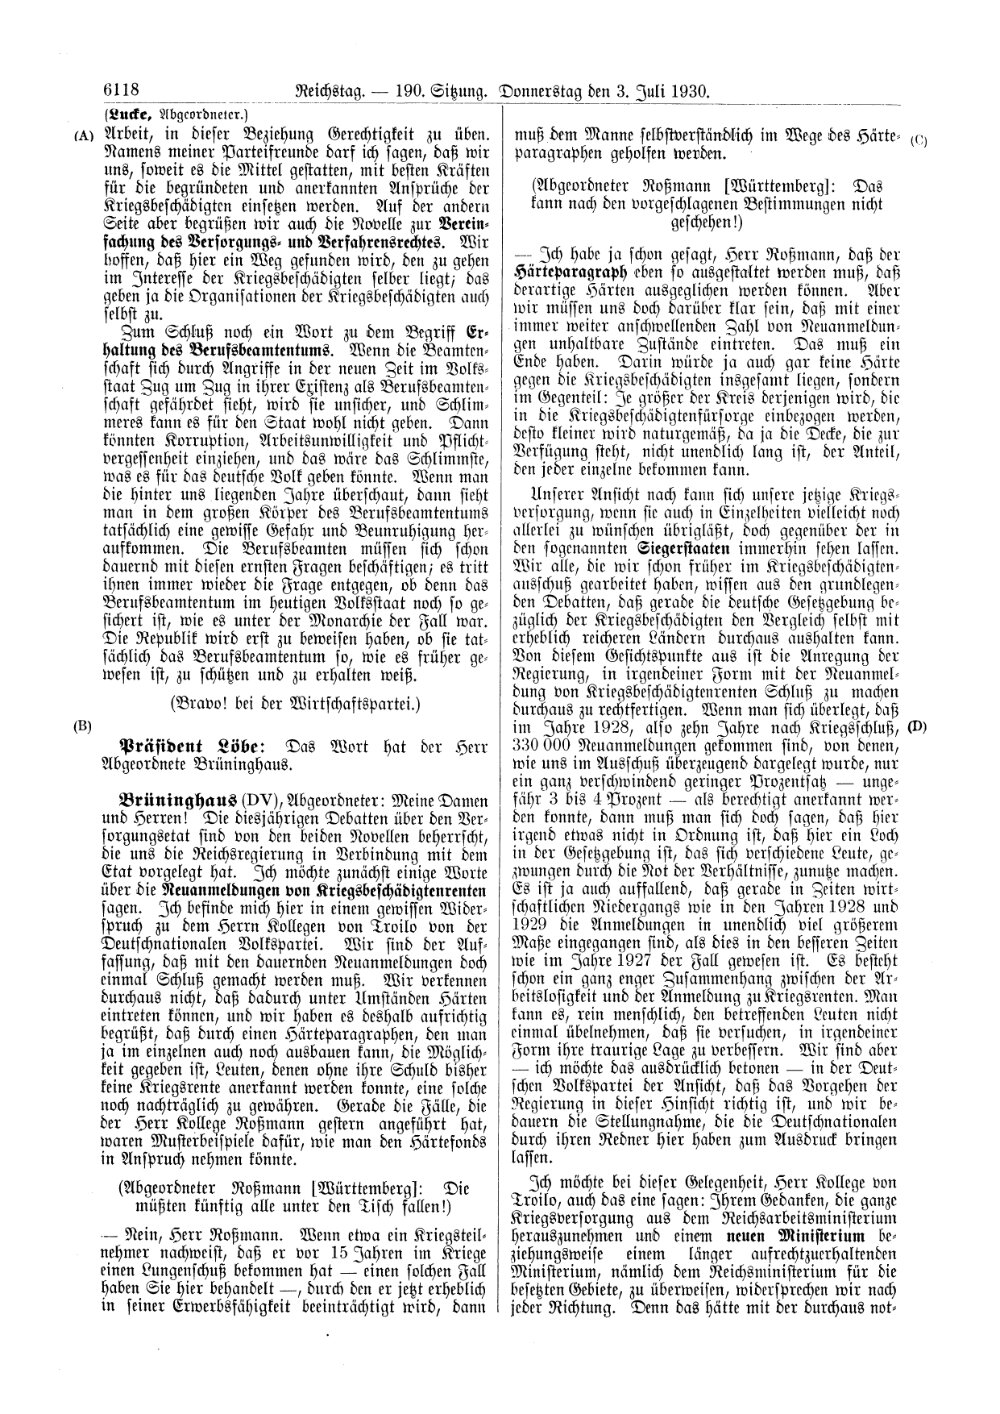 Scan of page 6118